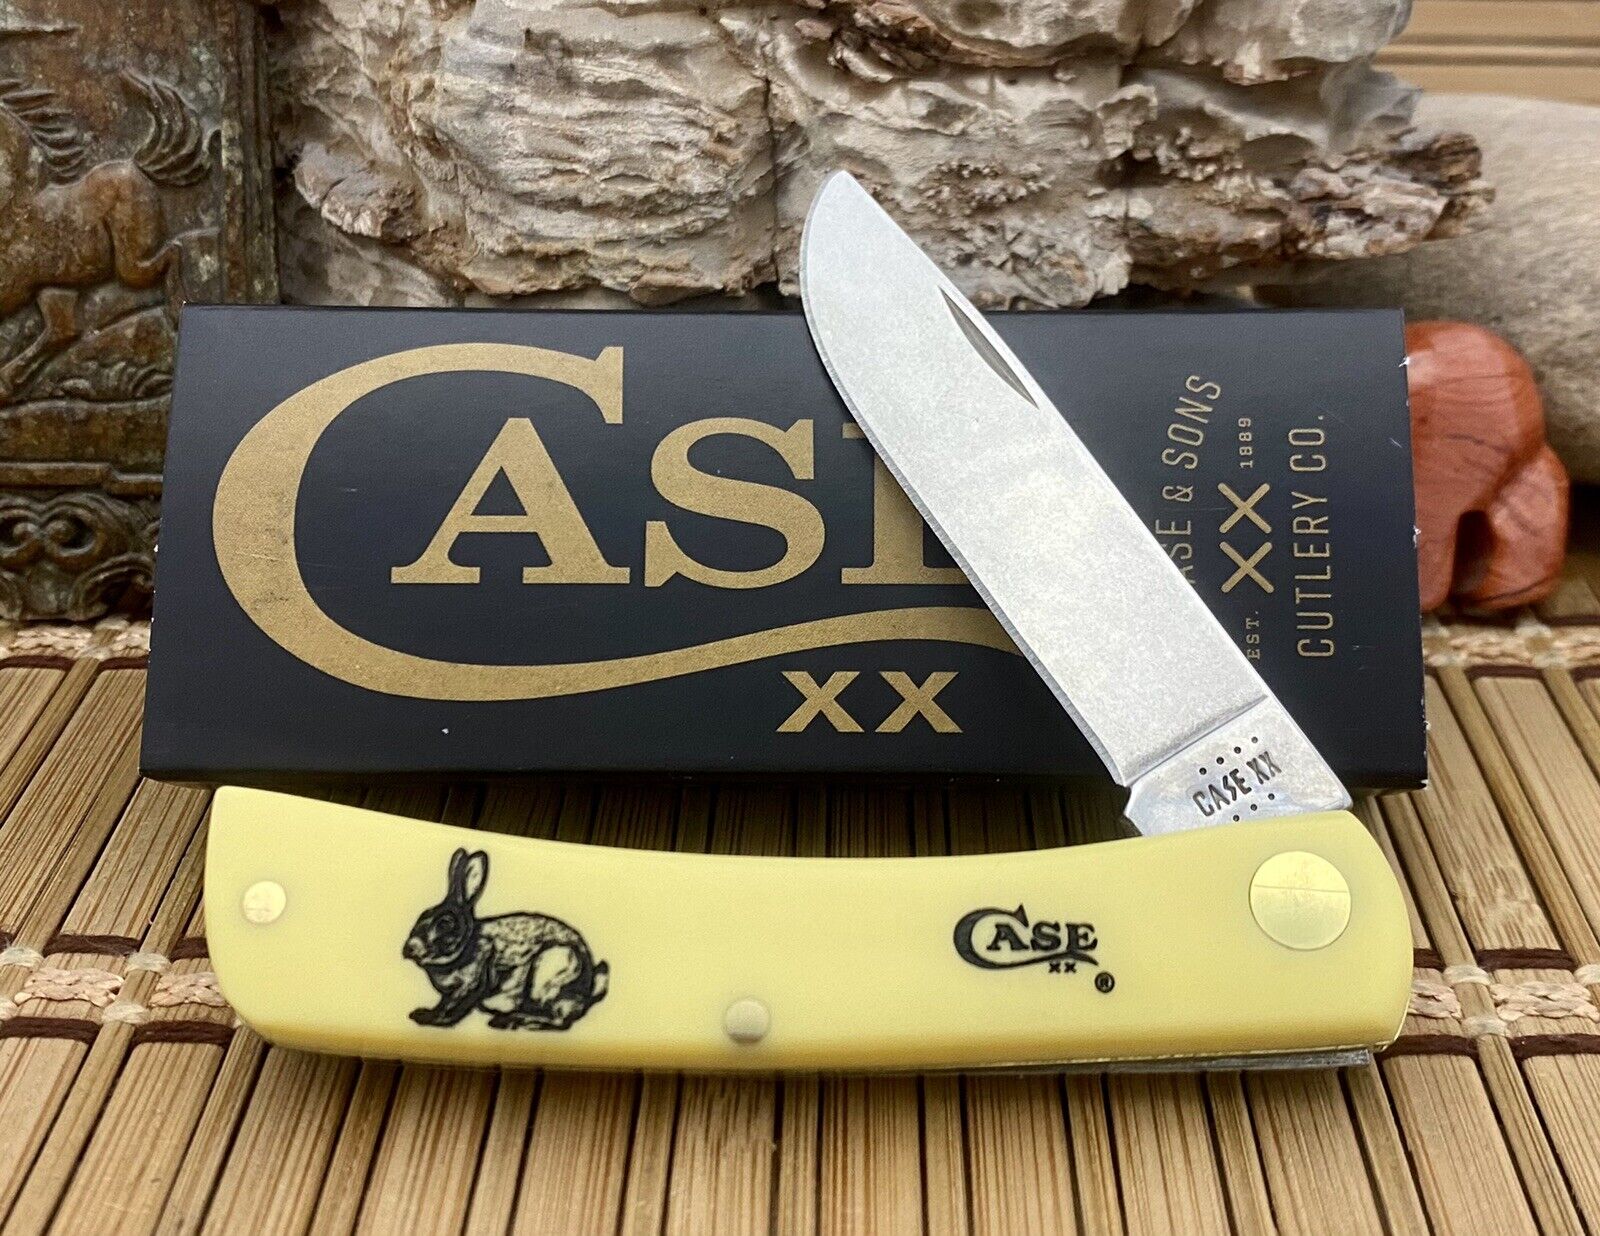 Case XX USA Smooth Yellow RABBIT Edition Stainless Sod Buster Jr Pocket Knife